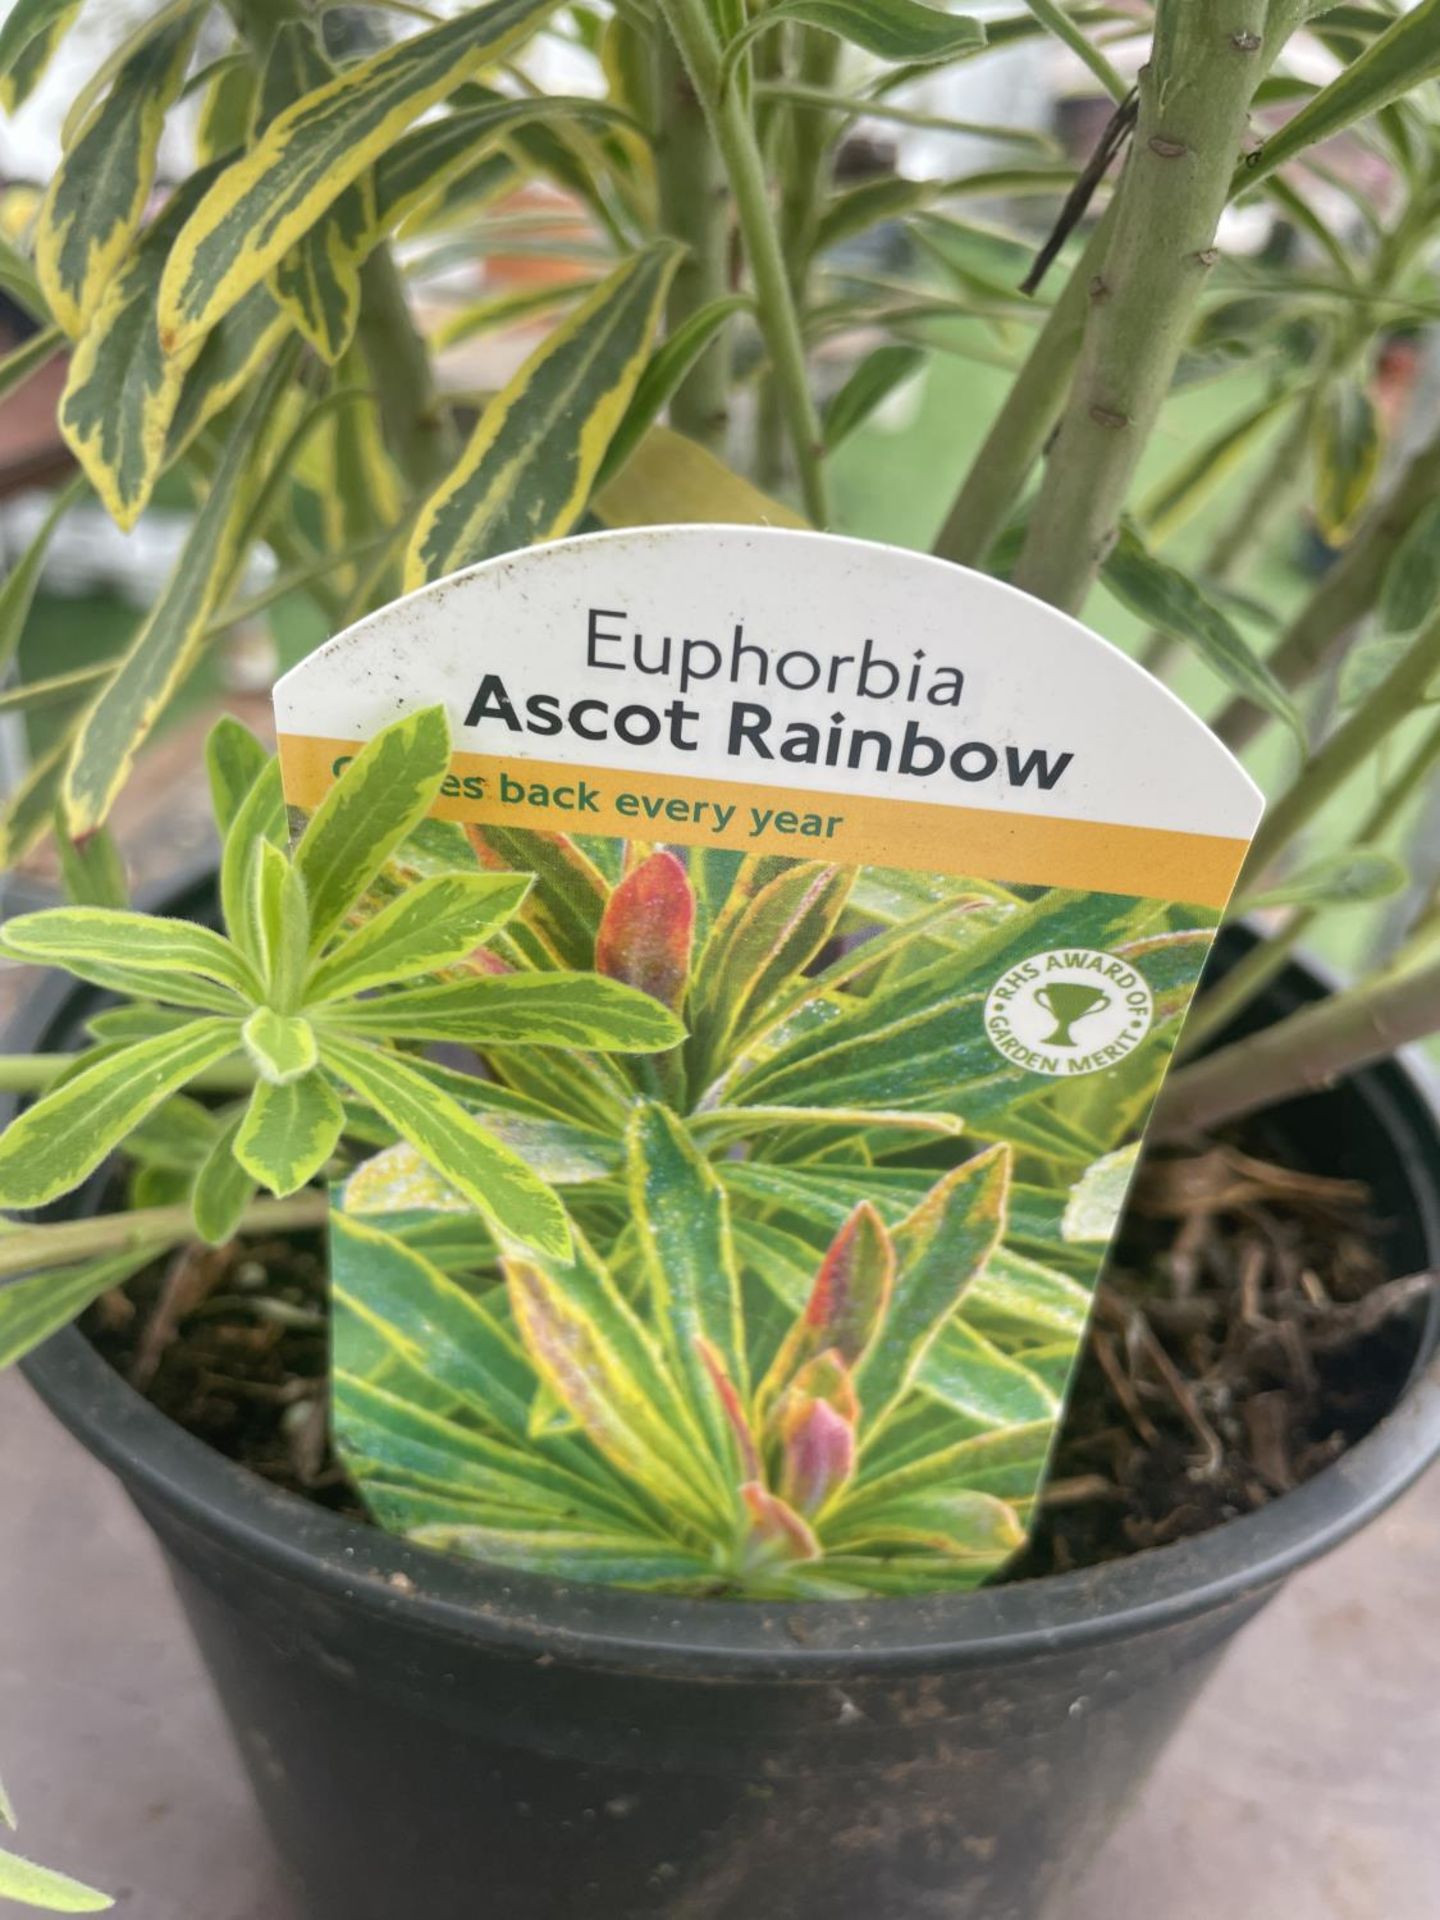 SIX EUPHORBIA ASCOT RAINBOW 80CM TALL TO BE SOLD FOR THE SIX PLUS VAT - Image 7 of 7